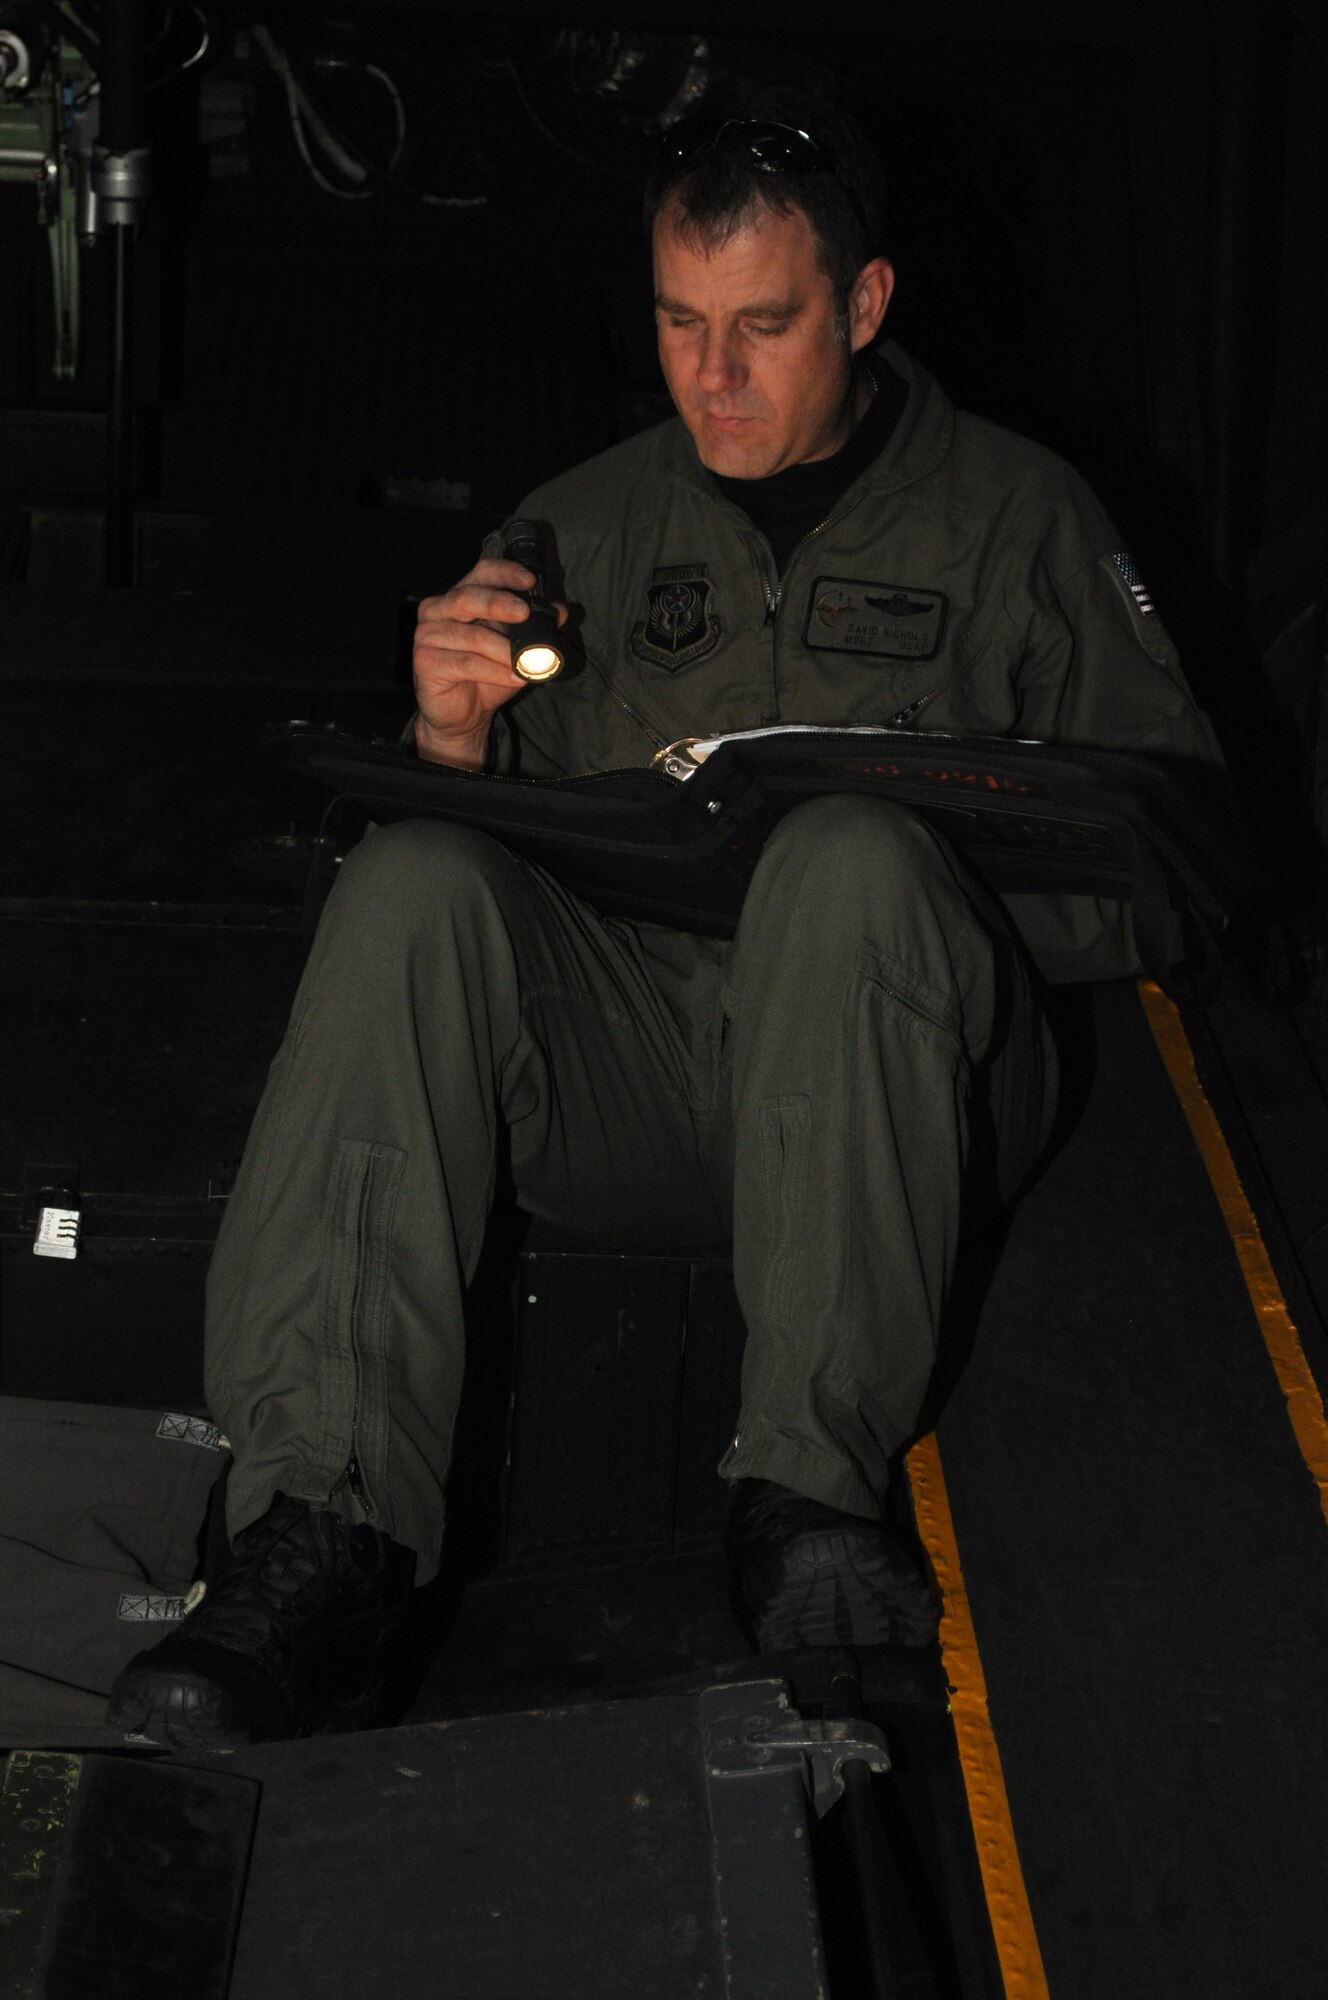 RAF MILDENHALL, England – Master Sgt. David Nichols, 67th Special Operations Squadron flight engineer, reviews maintenance forms during an aircraft pre-flight.  Sergeant Nichols is part of an MC-130P Combat Shadow crew that departed for Germany on Aug 4, in support of exercise ALLIED STRIKE 10.  The crew will be providing refueling support to the 56th Rescue Squadron, RAF Lakenheath’s two HH-60G helicopters currently participating in the exercise.  (U.S. Air Force photo by Tech. Sgt. Marelise Wood)